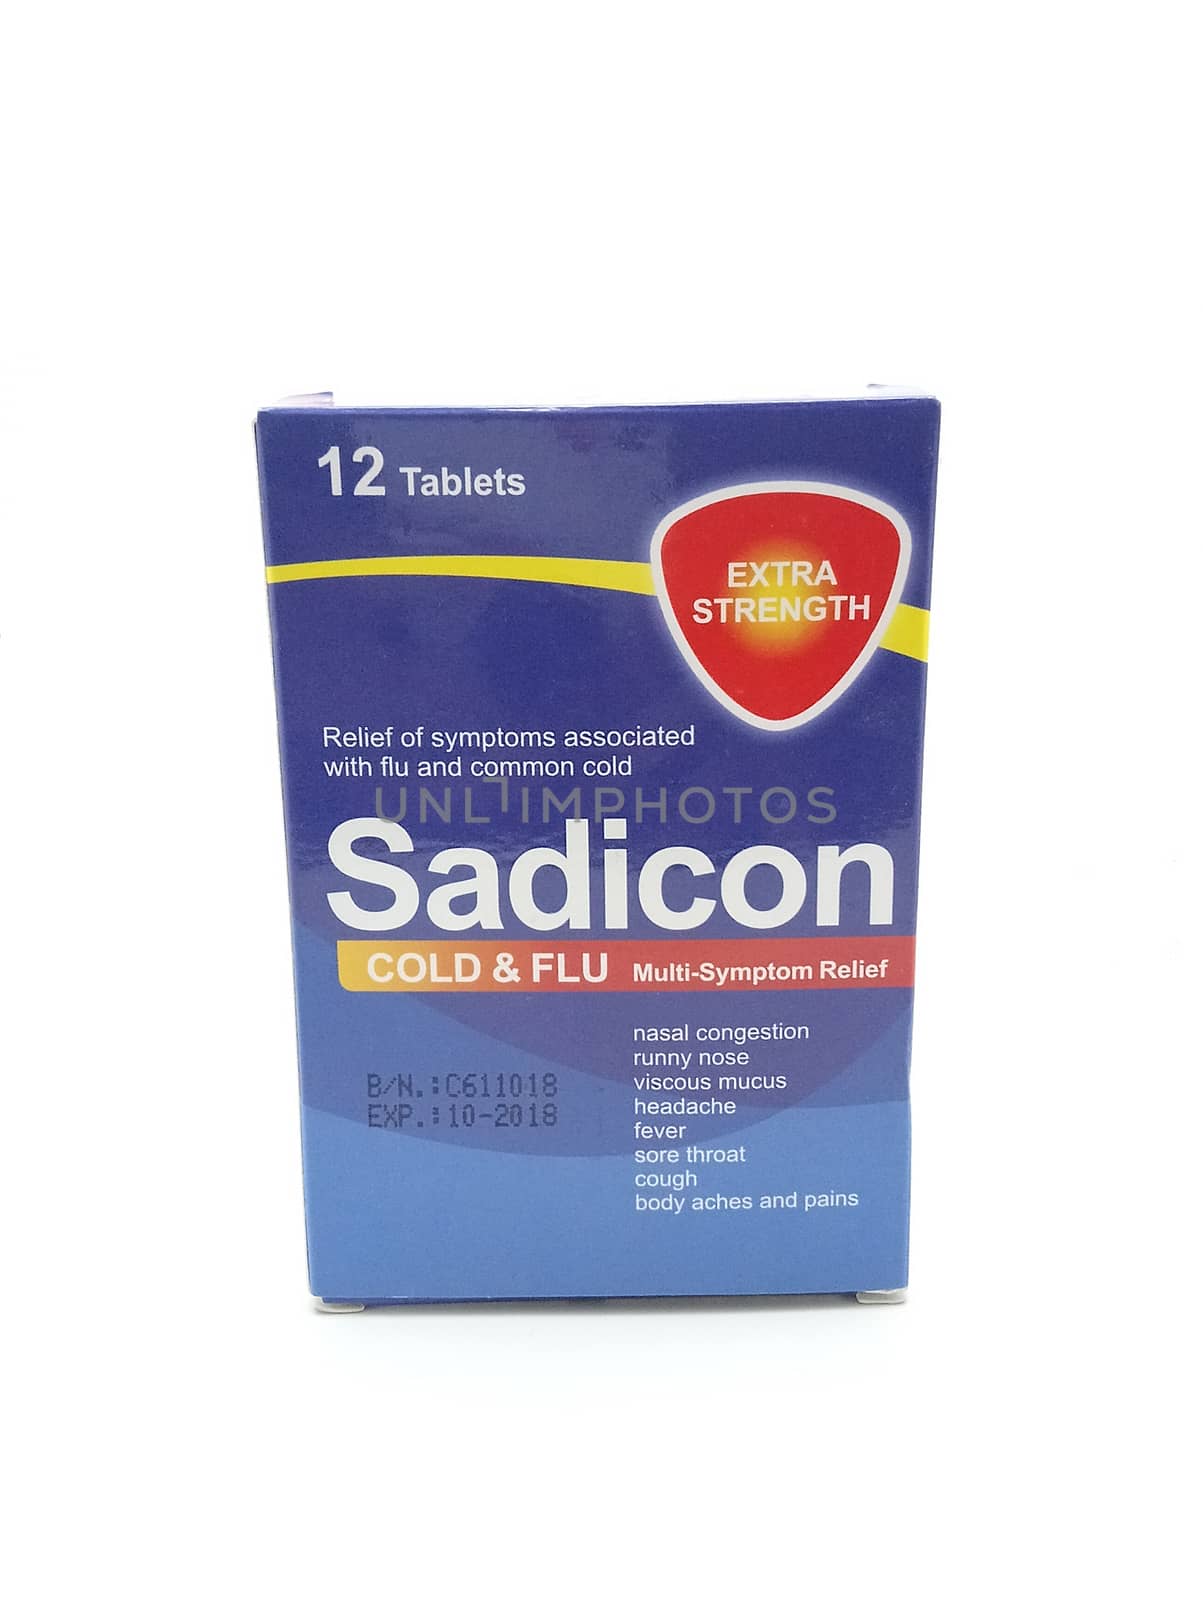 Sadicon cold and flu tablets box in Manila, Philippines by imwaltersy